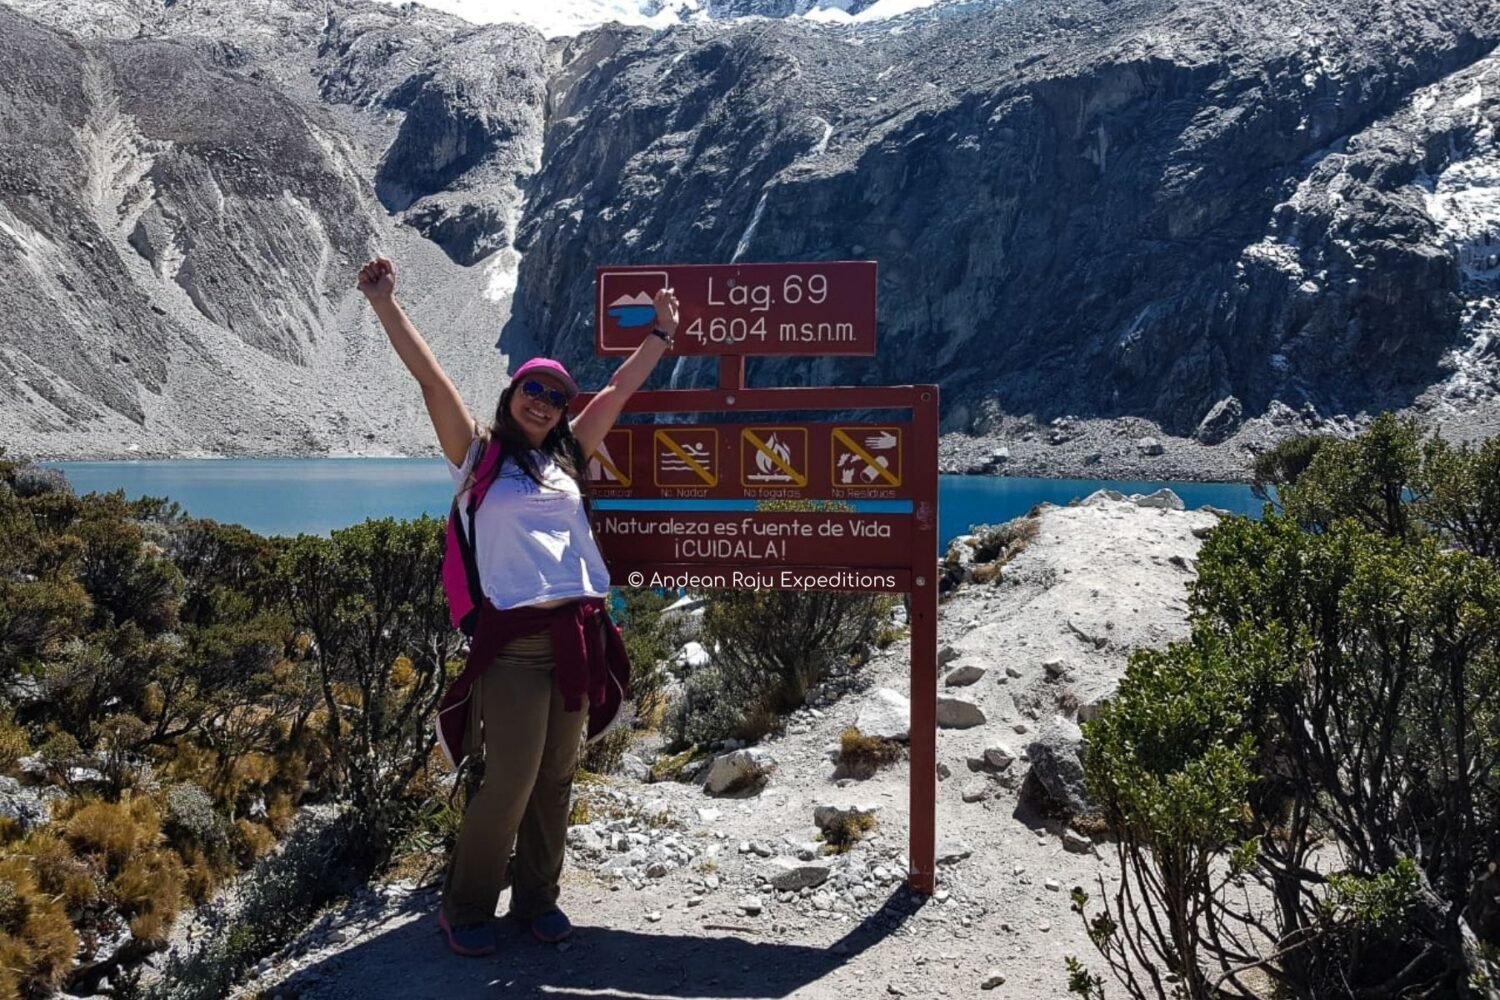 Our client from Brazil happy to get to laguna 69